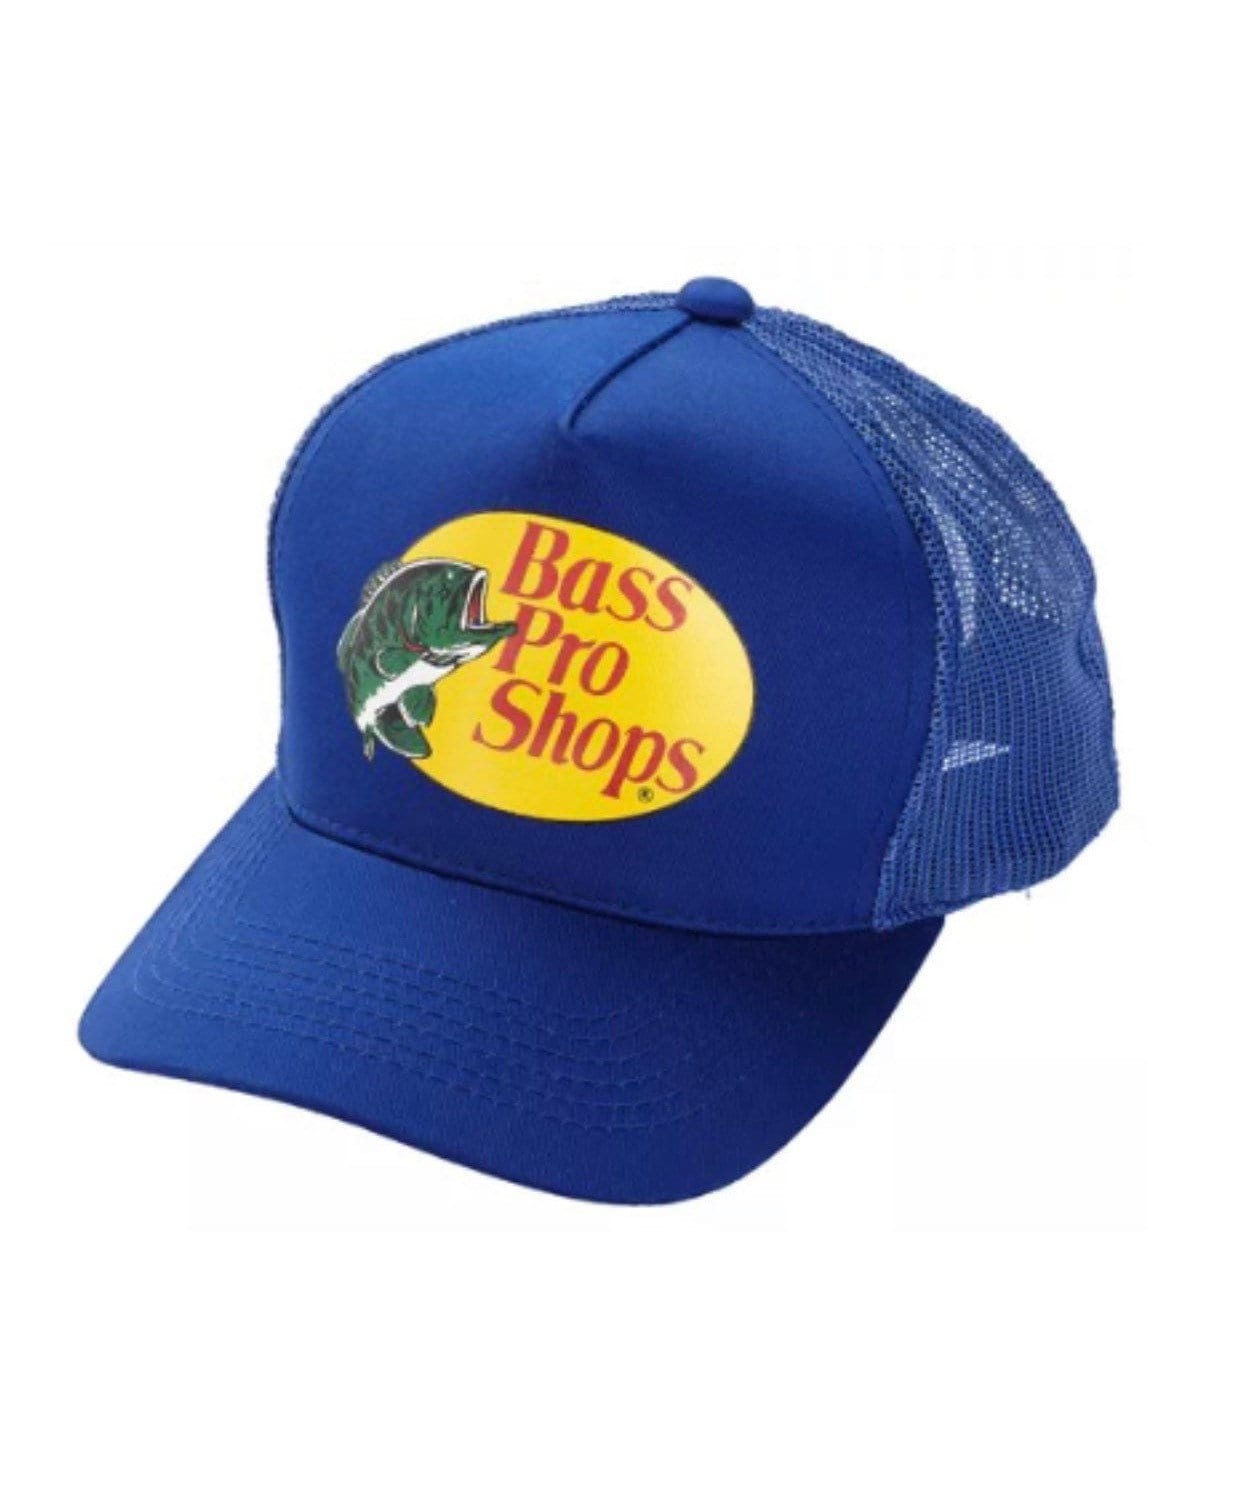 Brand New Bass Pro Shops Mesh Trucker Hat ROYAL BLUE Ships Within